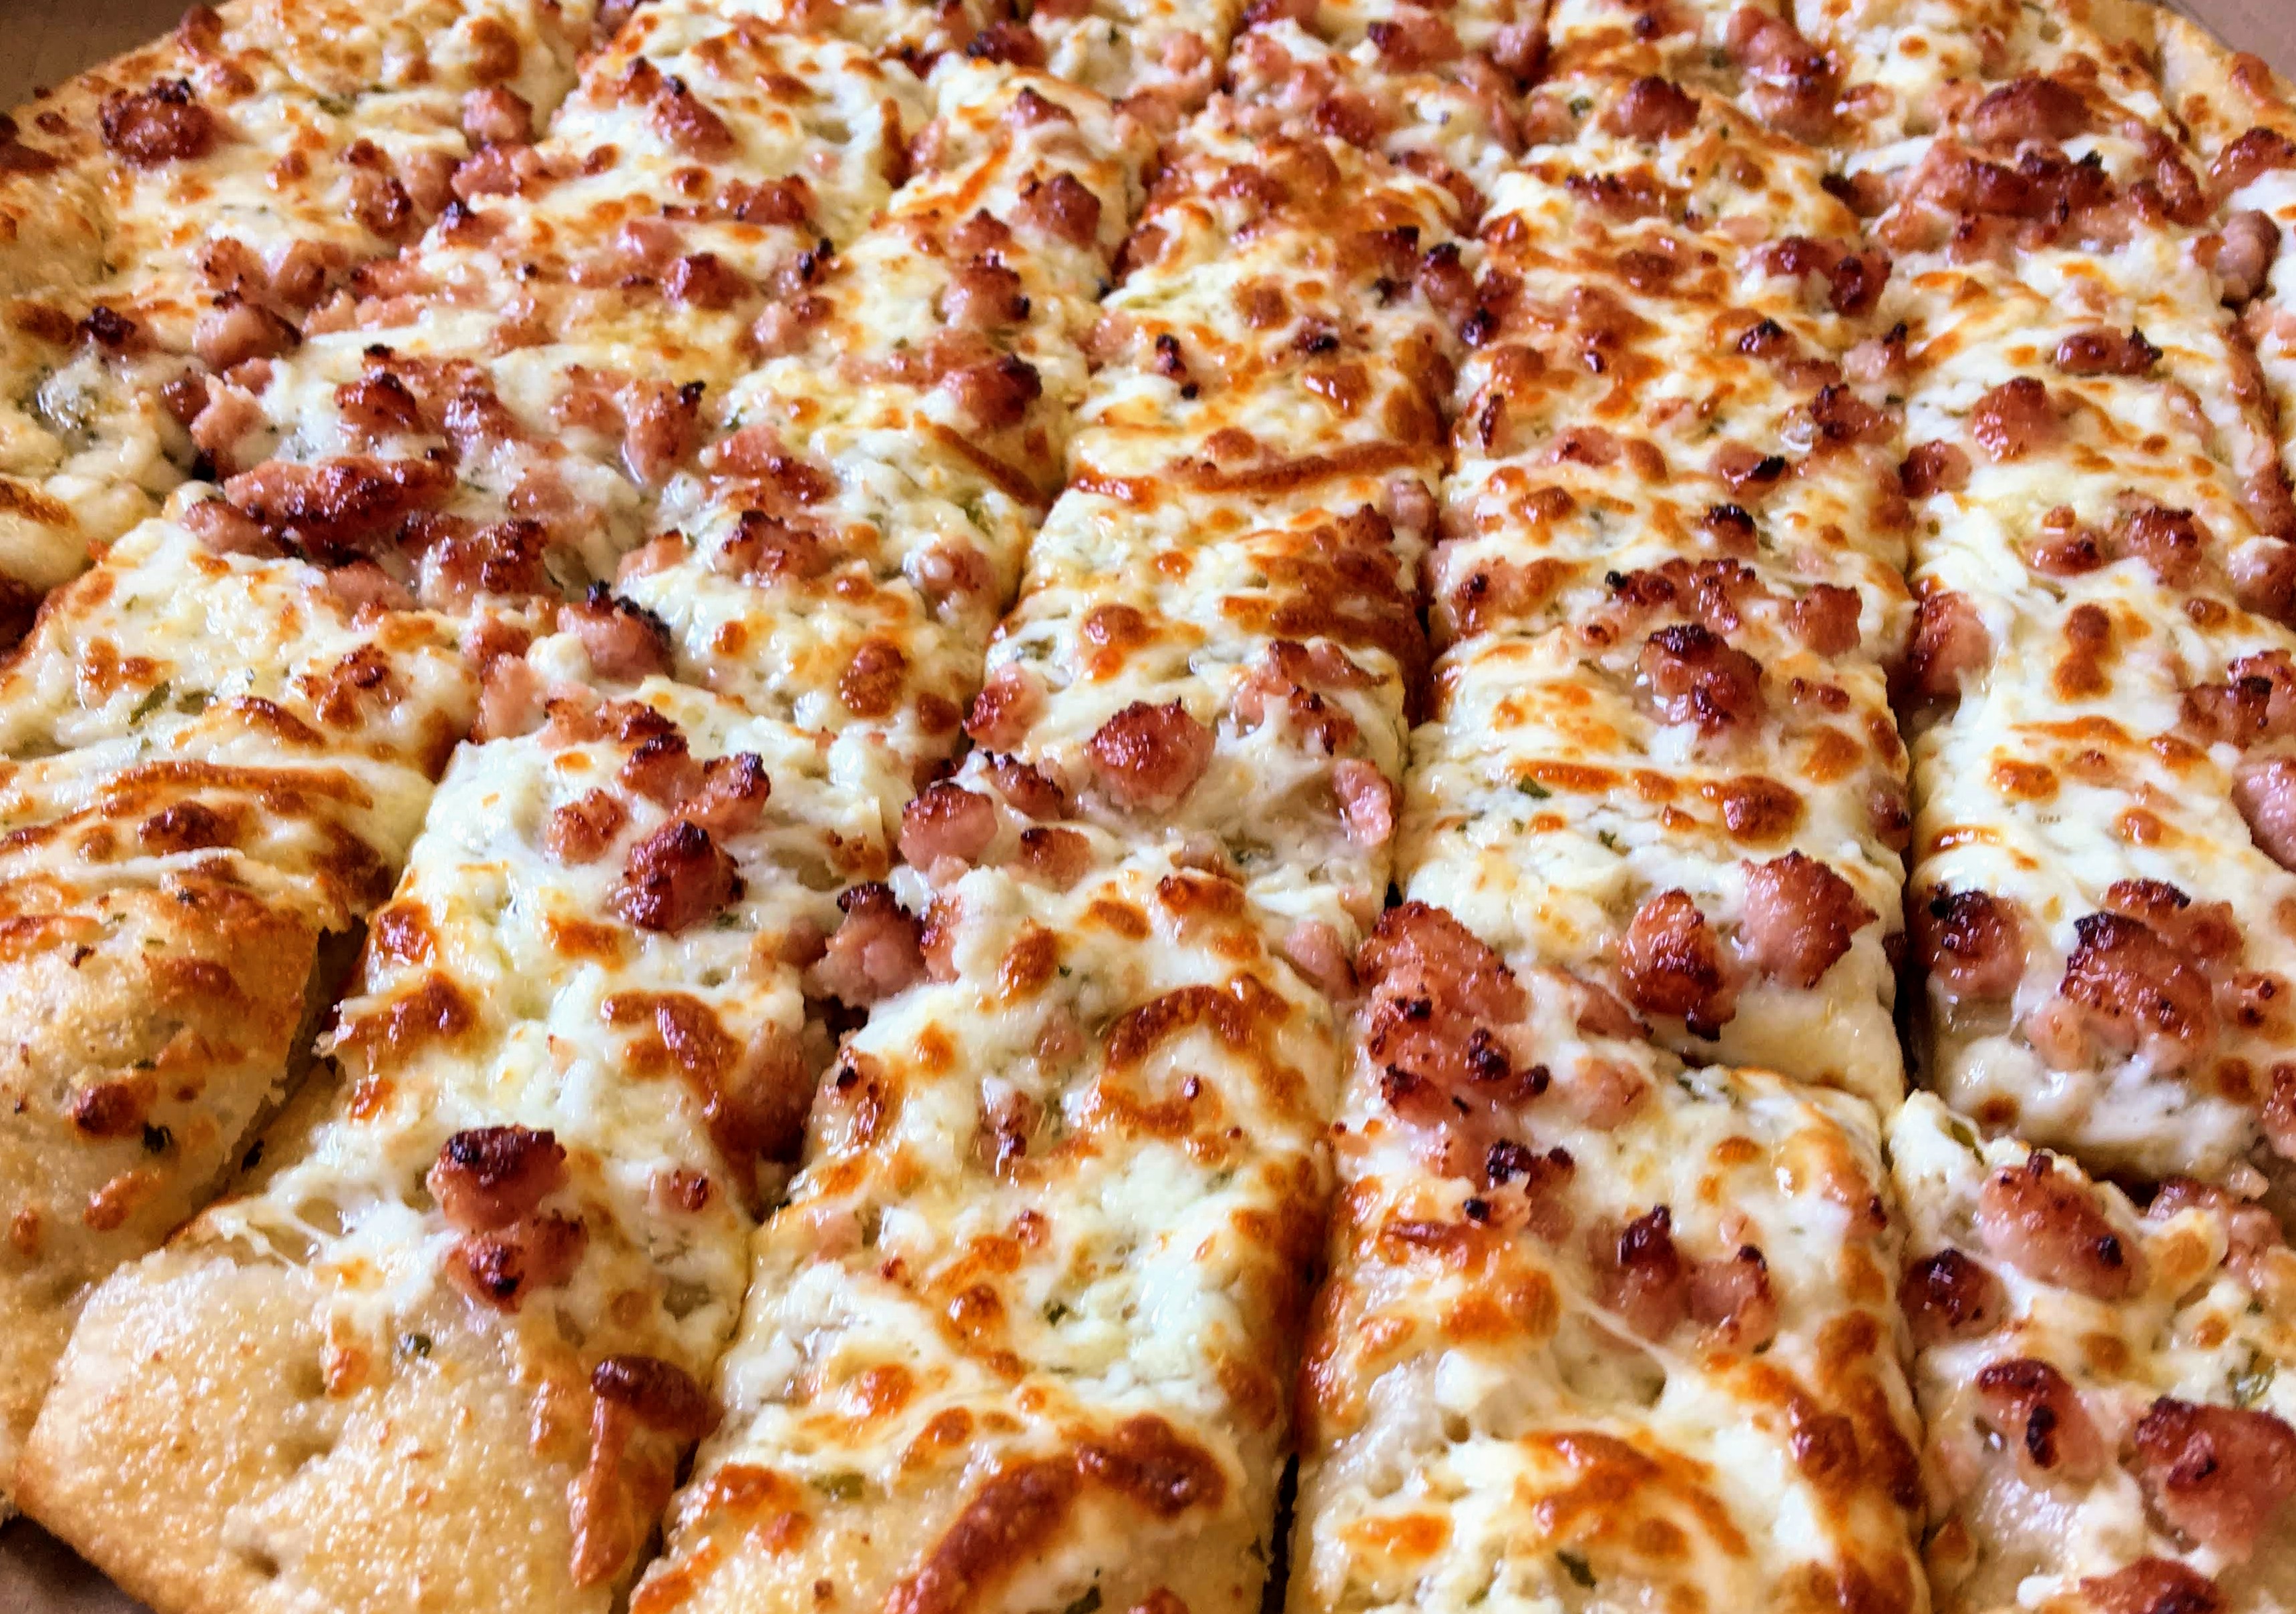 Garlic Fingers with Bacon and Cheese